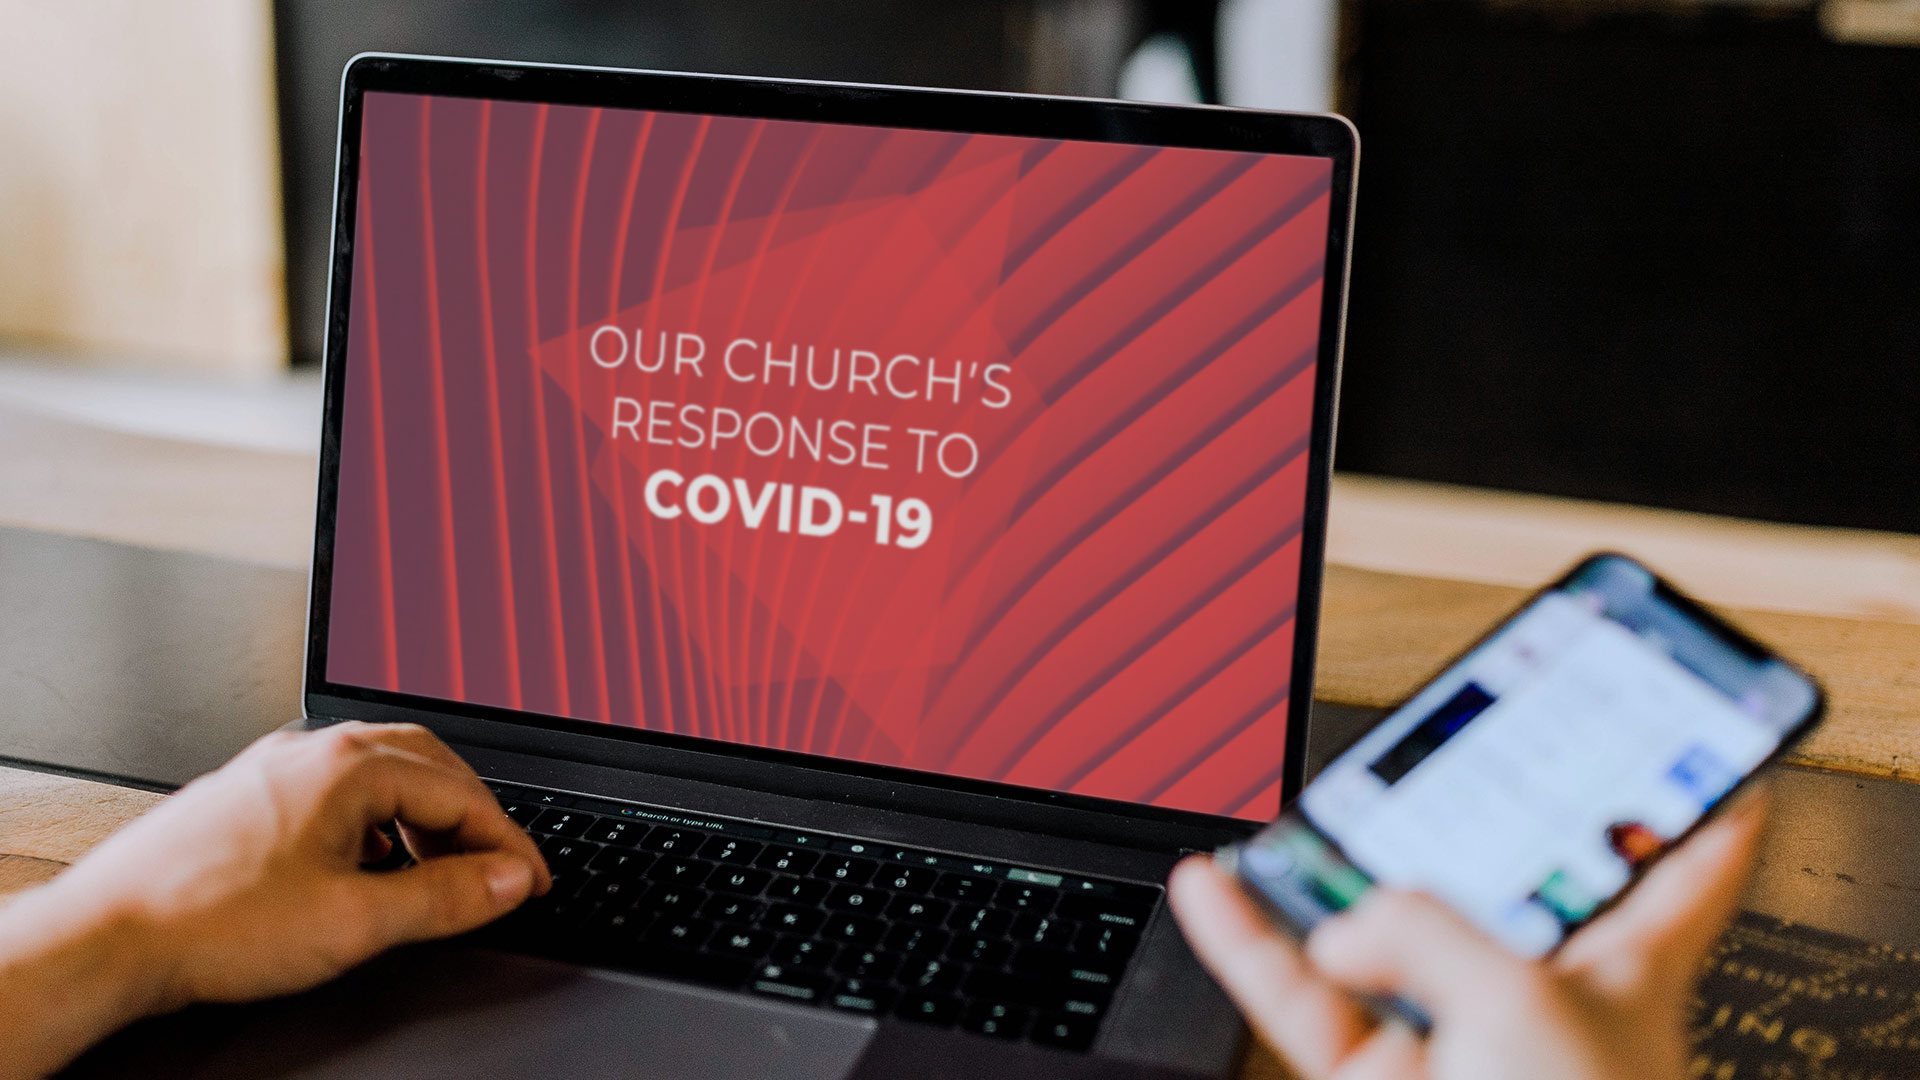 COVID-19 (Coronavirus) Resources To Help Your Church Effectively Communicate With Your Community